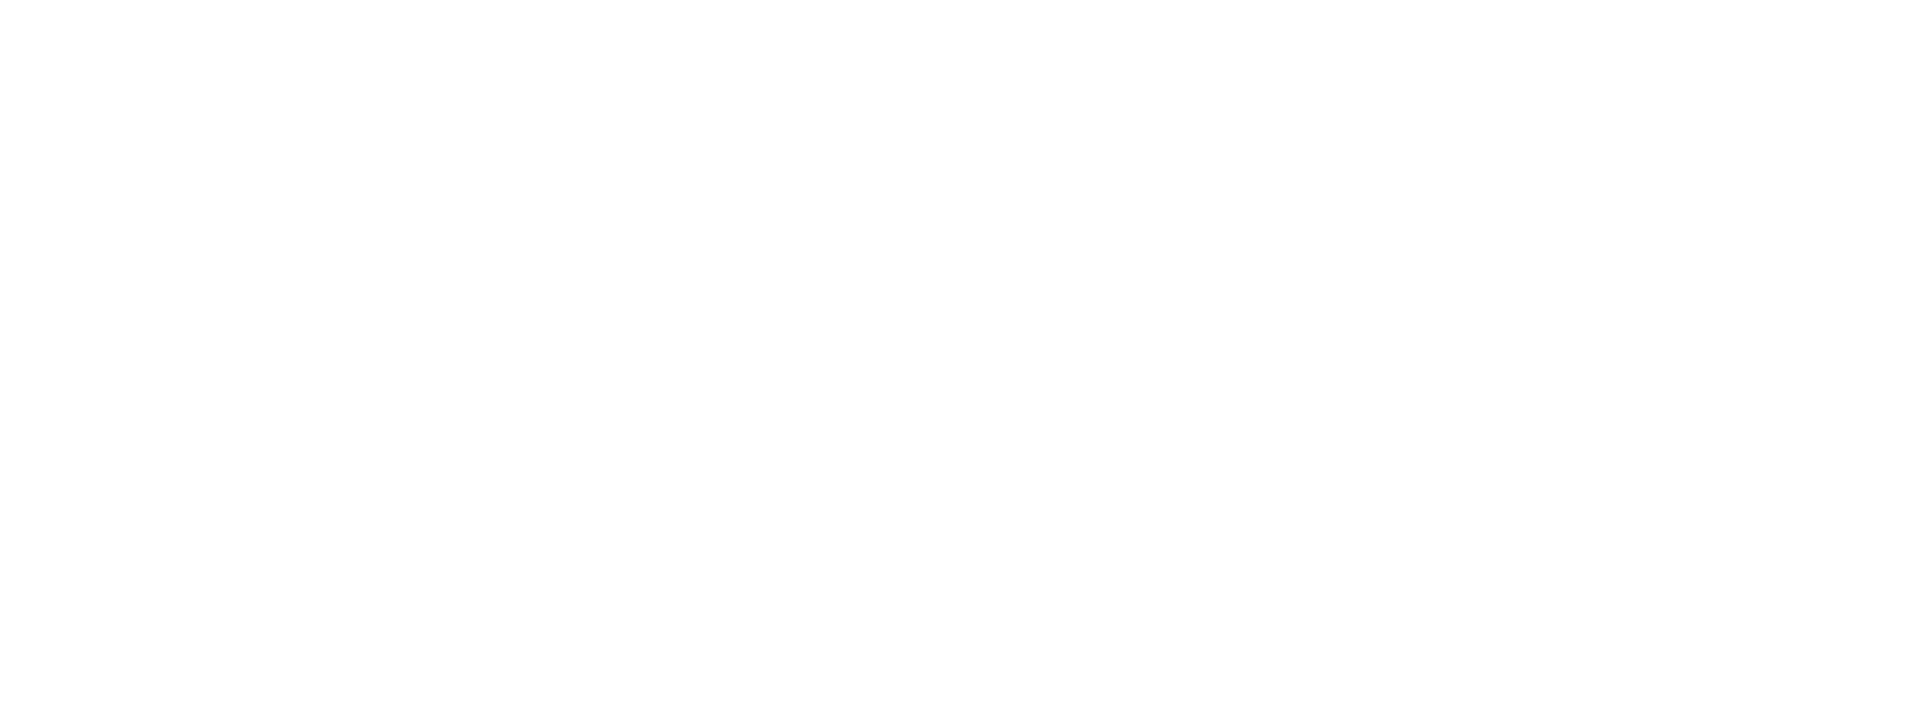 to be continued SNS!（つづきはSNSで！）